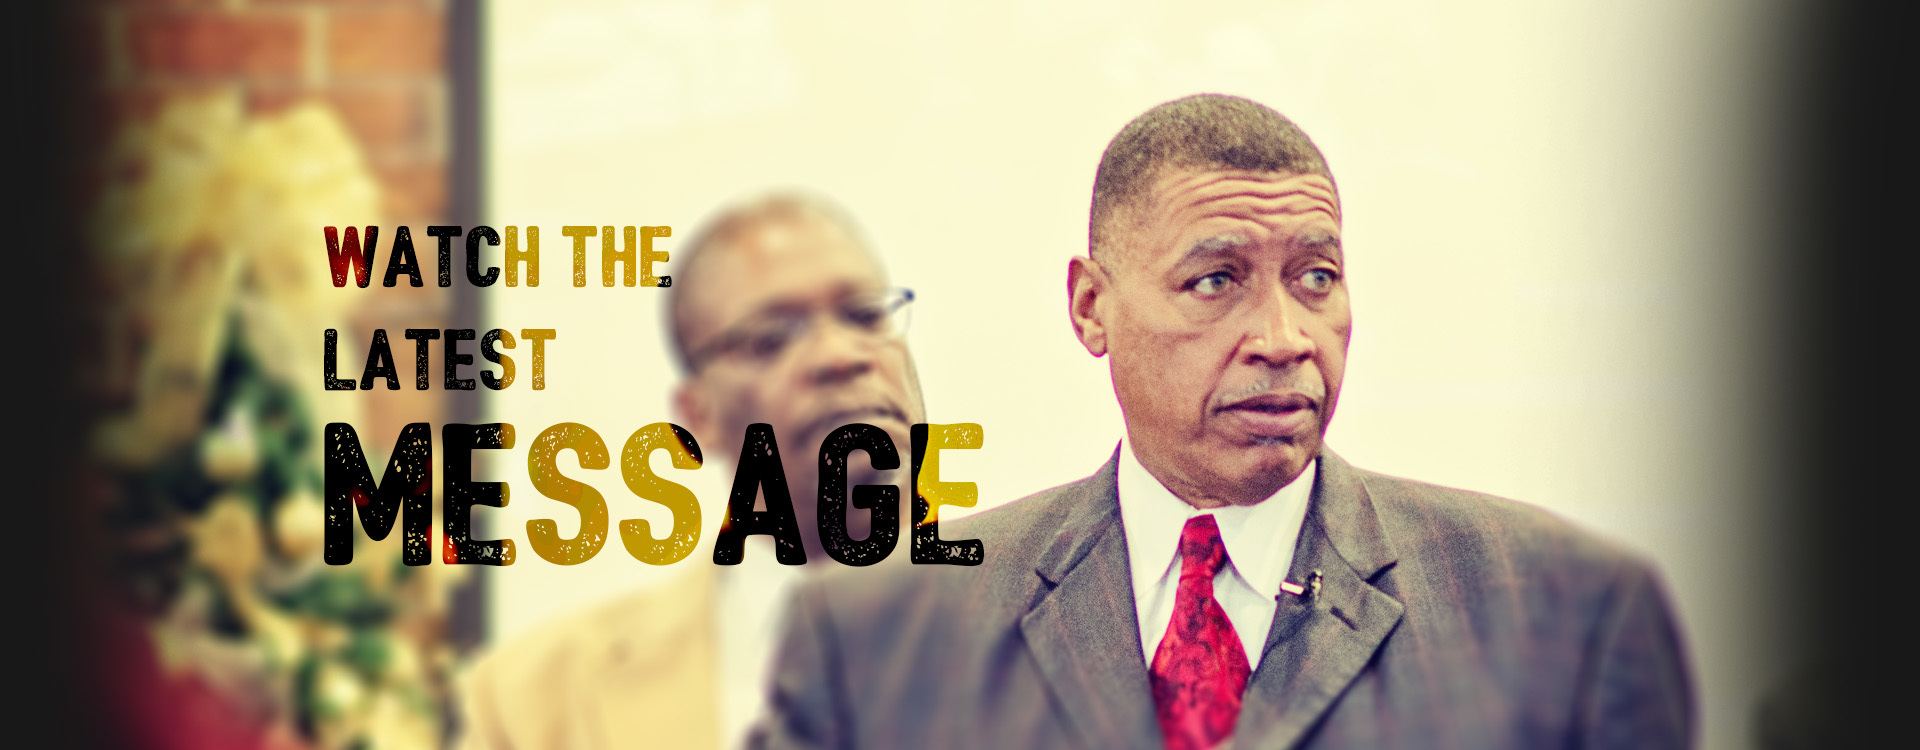 watch-the-latest-message-by-bishop-jeffrey-reed